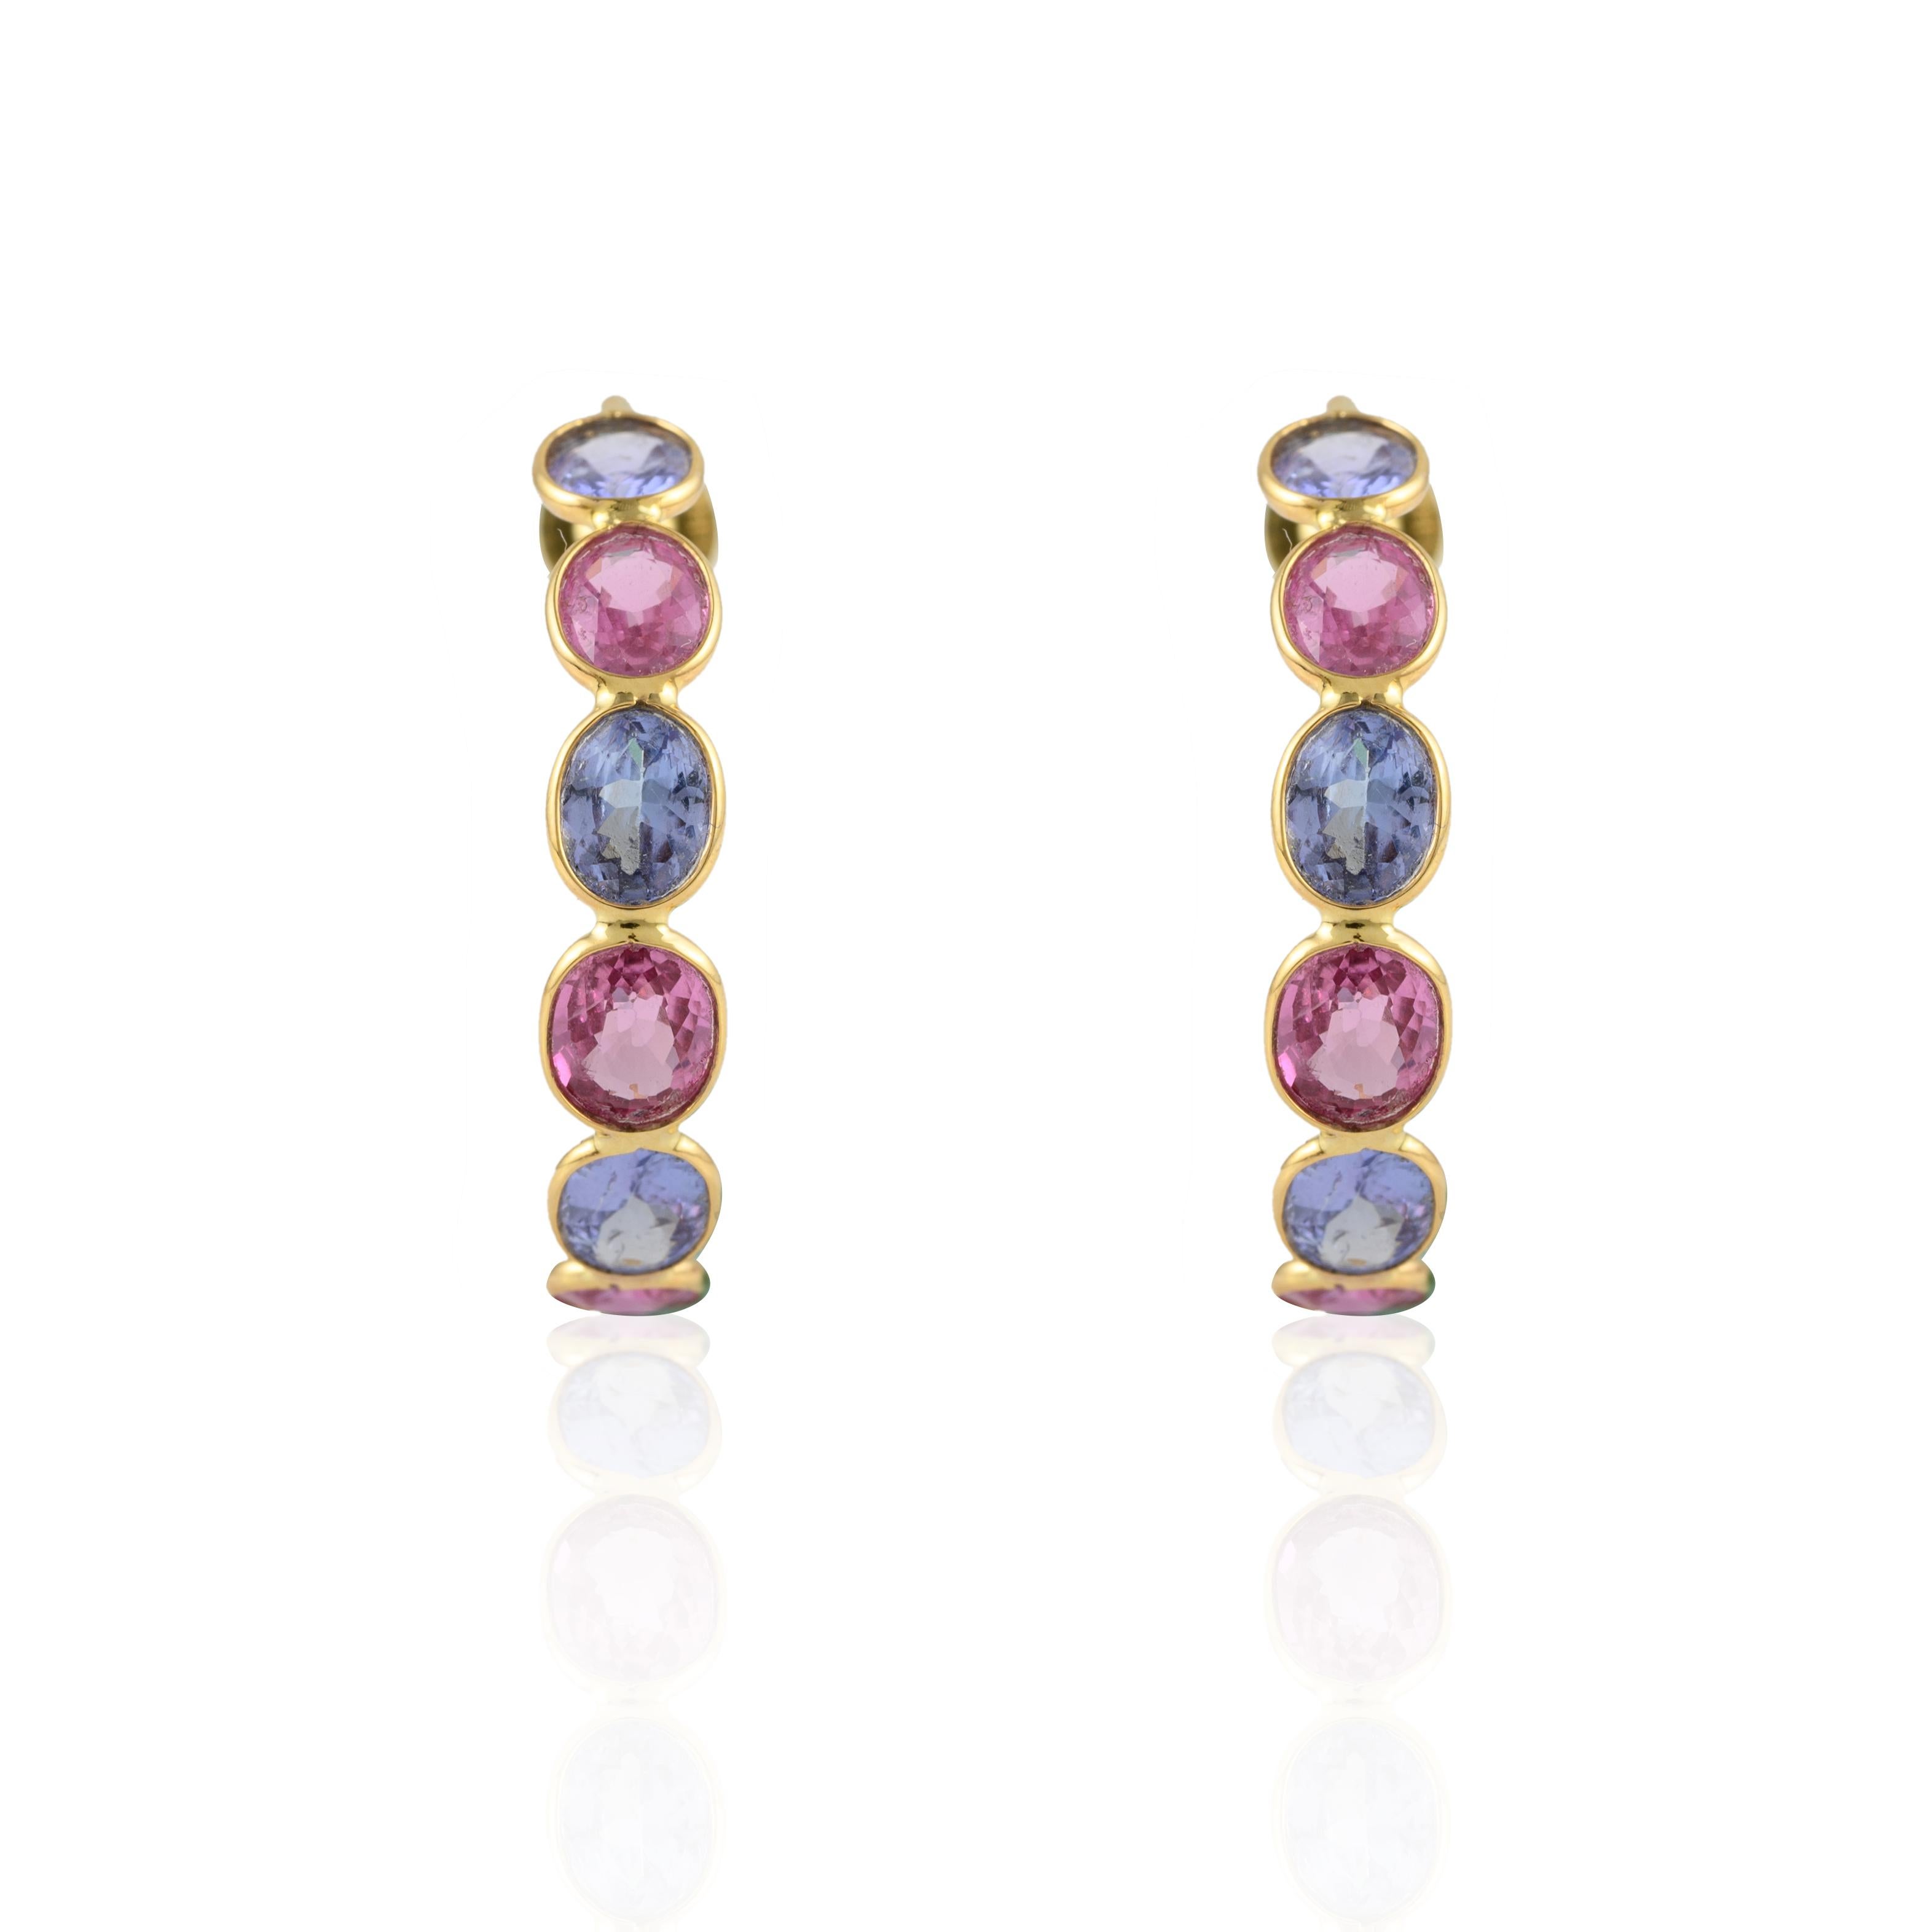 Multi Sapphire Hoop Earrings in 14K Gold to make a statement with your look. You shall need open hoop earrings to make a statement with your look. These earrings create a sparkling, luxurious look featuring oval cut gemstone.
Sapphire stimulates